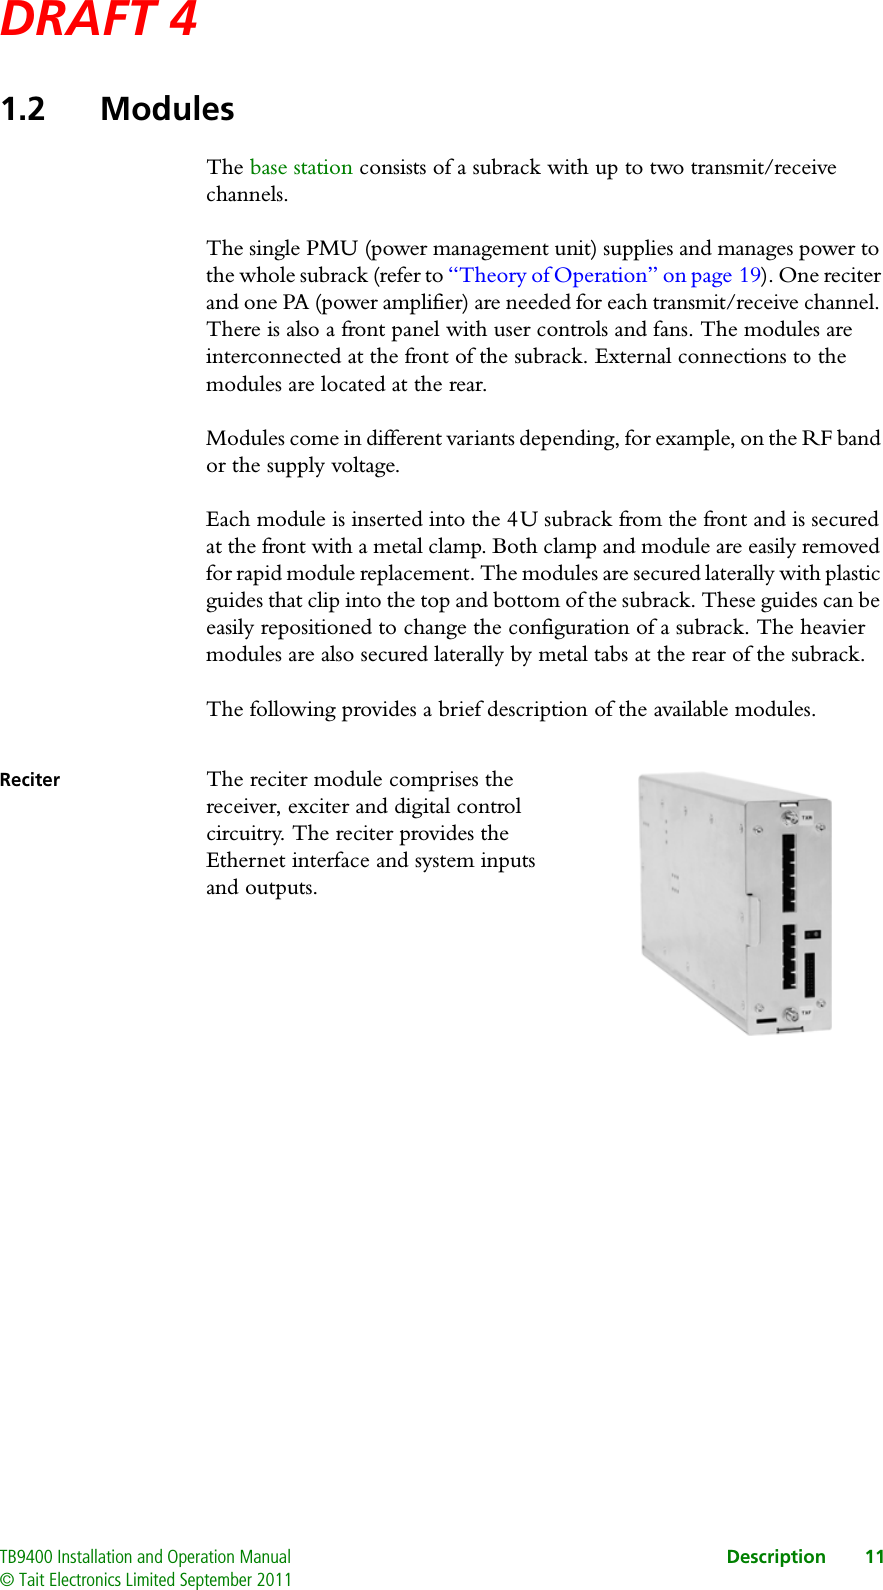 DRAFT 4 TB9400 Installation and Operation Manual Description 11© Tait Electronics Limited September 20111.2 ModulesThe base station consists of a subrack with up to two transmit/receive channels.The single PMU (power management unit) supplies and manages power to the whole subrack (refer to “Theory of Operation” on page 19). One reciter and one PA (power amplifier) are needed for each transmit/receive channel. There is also a front panel with user controls and fans. The modules are interconnected at the front of the subrack. External connections to the modules are located at the rear.Modules come in different variants depending, for example, on the RF band or the supply voltage. Each module is inserted into the 4 U subrack from the front and is secured at the front with a metal clamp. Both clamp and module are easily removed for rapid module replacement. The modules are secured laterally with plastic guides that clip into the top and bottom of the subrack. These guides can be easily repositioned to change the configuration of a subrack. The heavier modules are also secured laterally by metal tabs at the rear of the subrack.The following provides a brief description of the available modules.Reciter The reciter module comprises the receiver, exciter and digital control circuitry. The reciter provides the Ethernet interface and system inputs and outputs. 